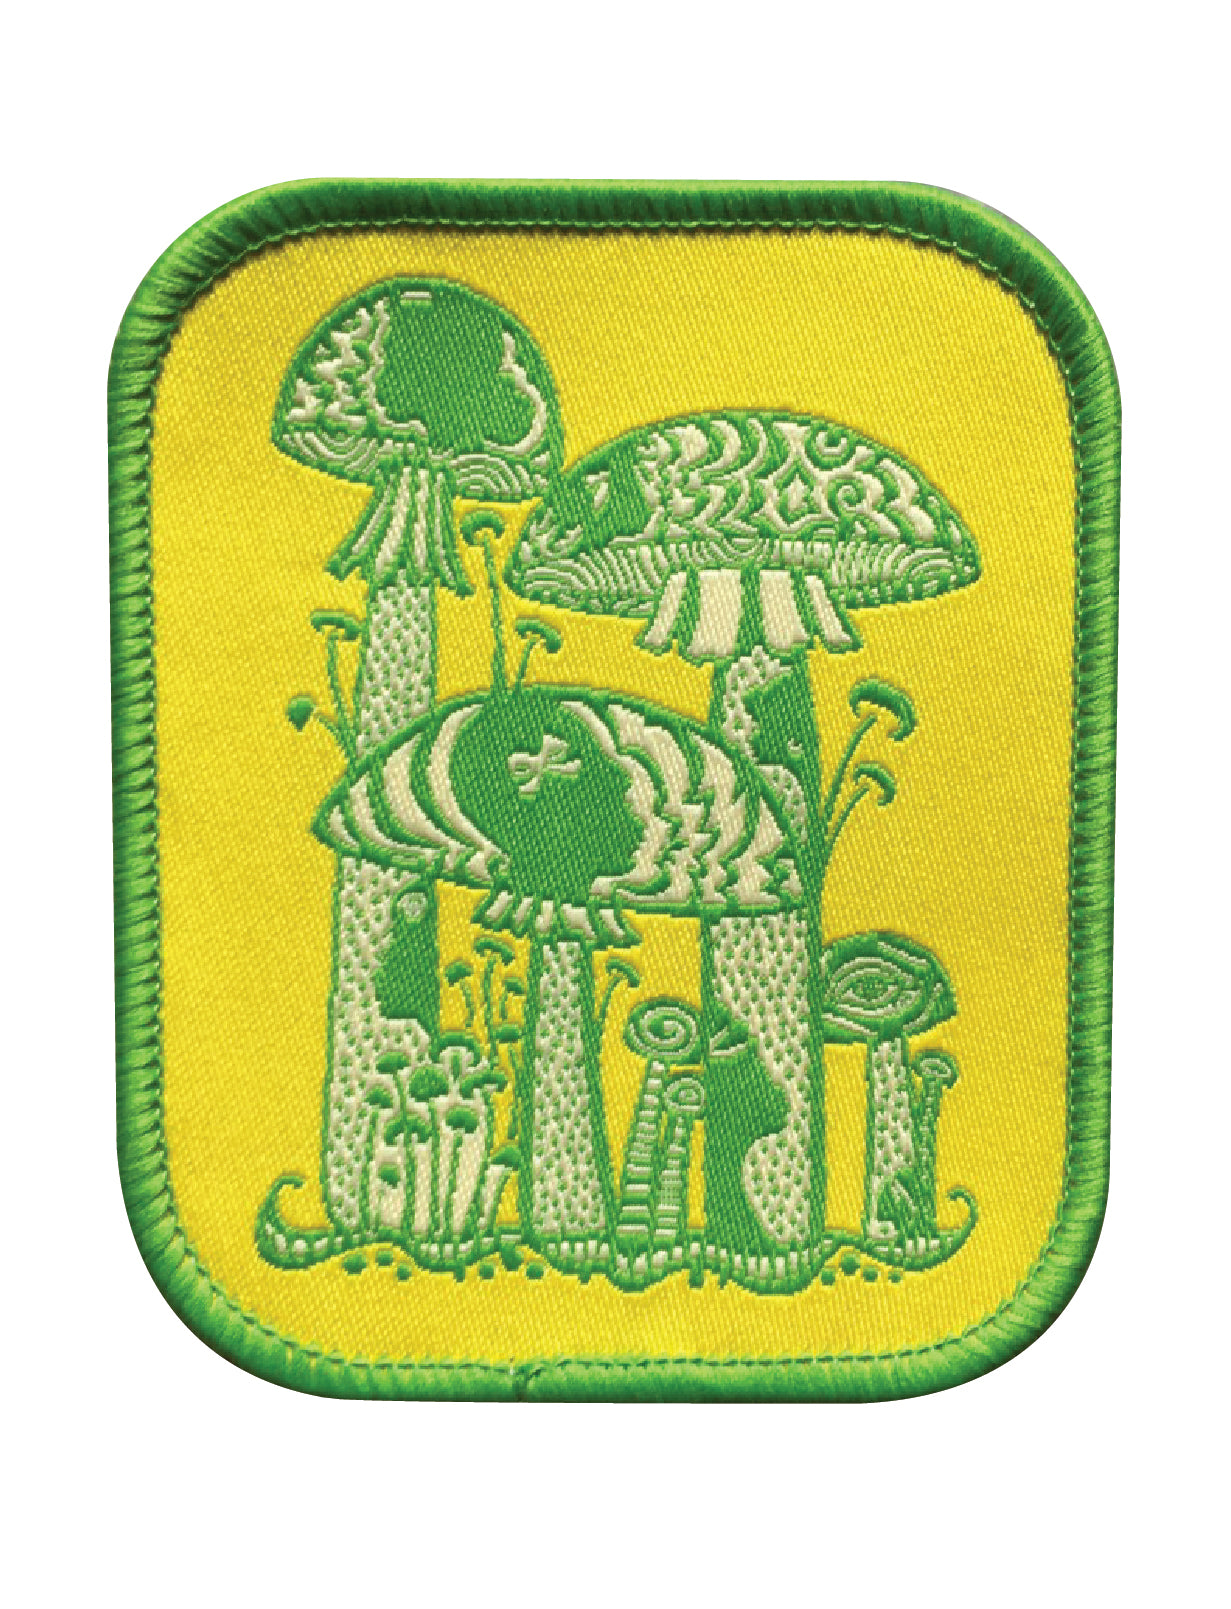 Lime green, yellow and white psychedelic mushroom iron on patch